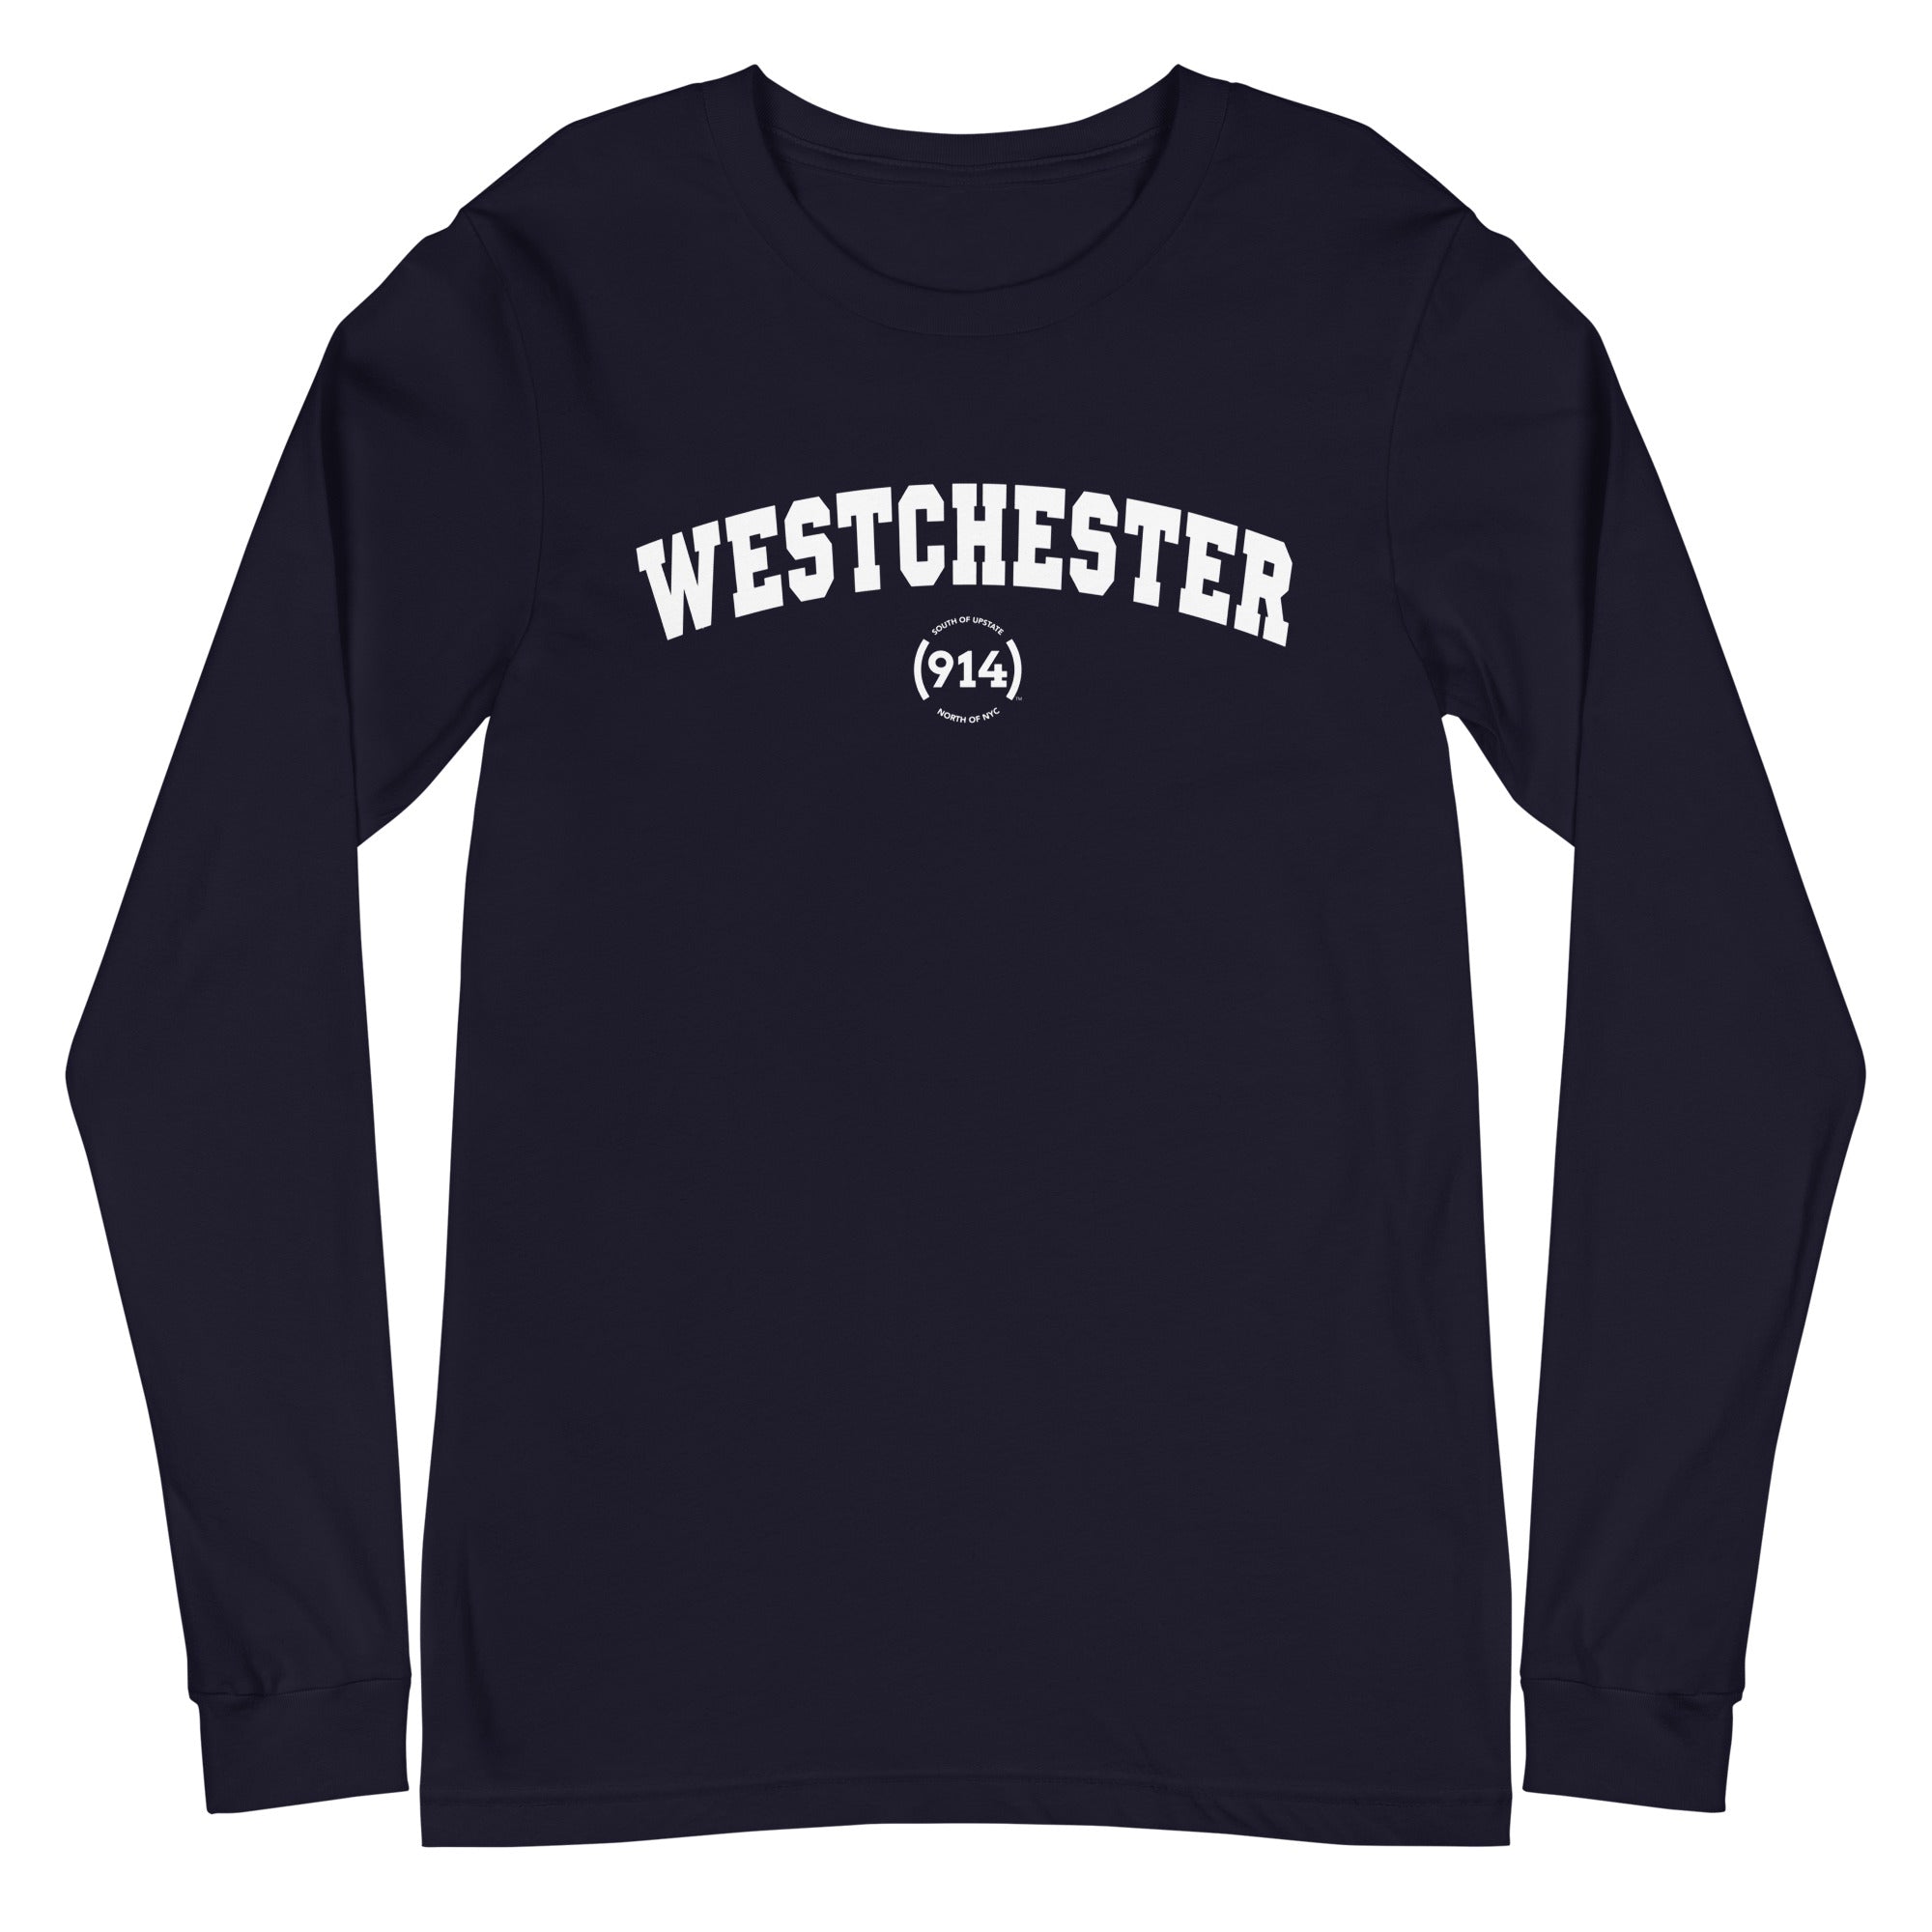 Signature Colored Long Sleeves (White Print)